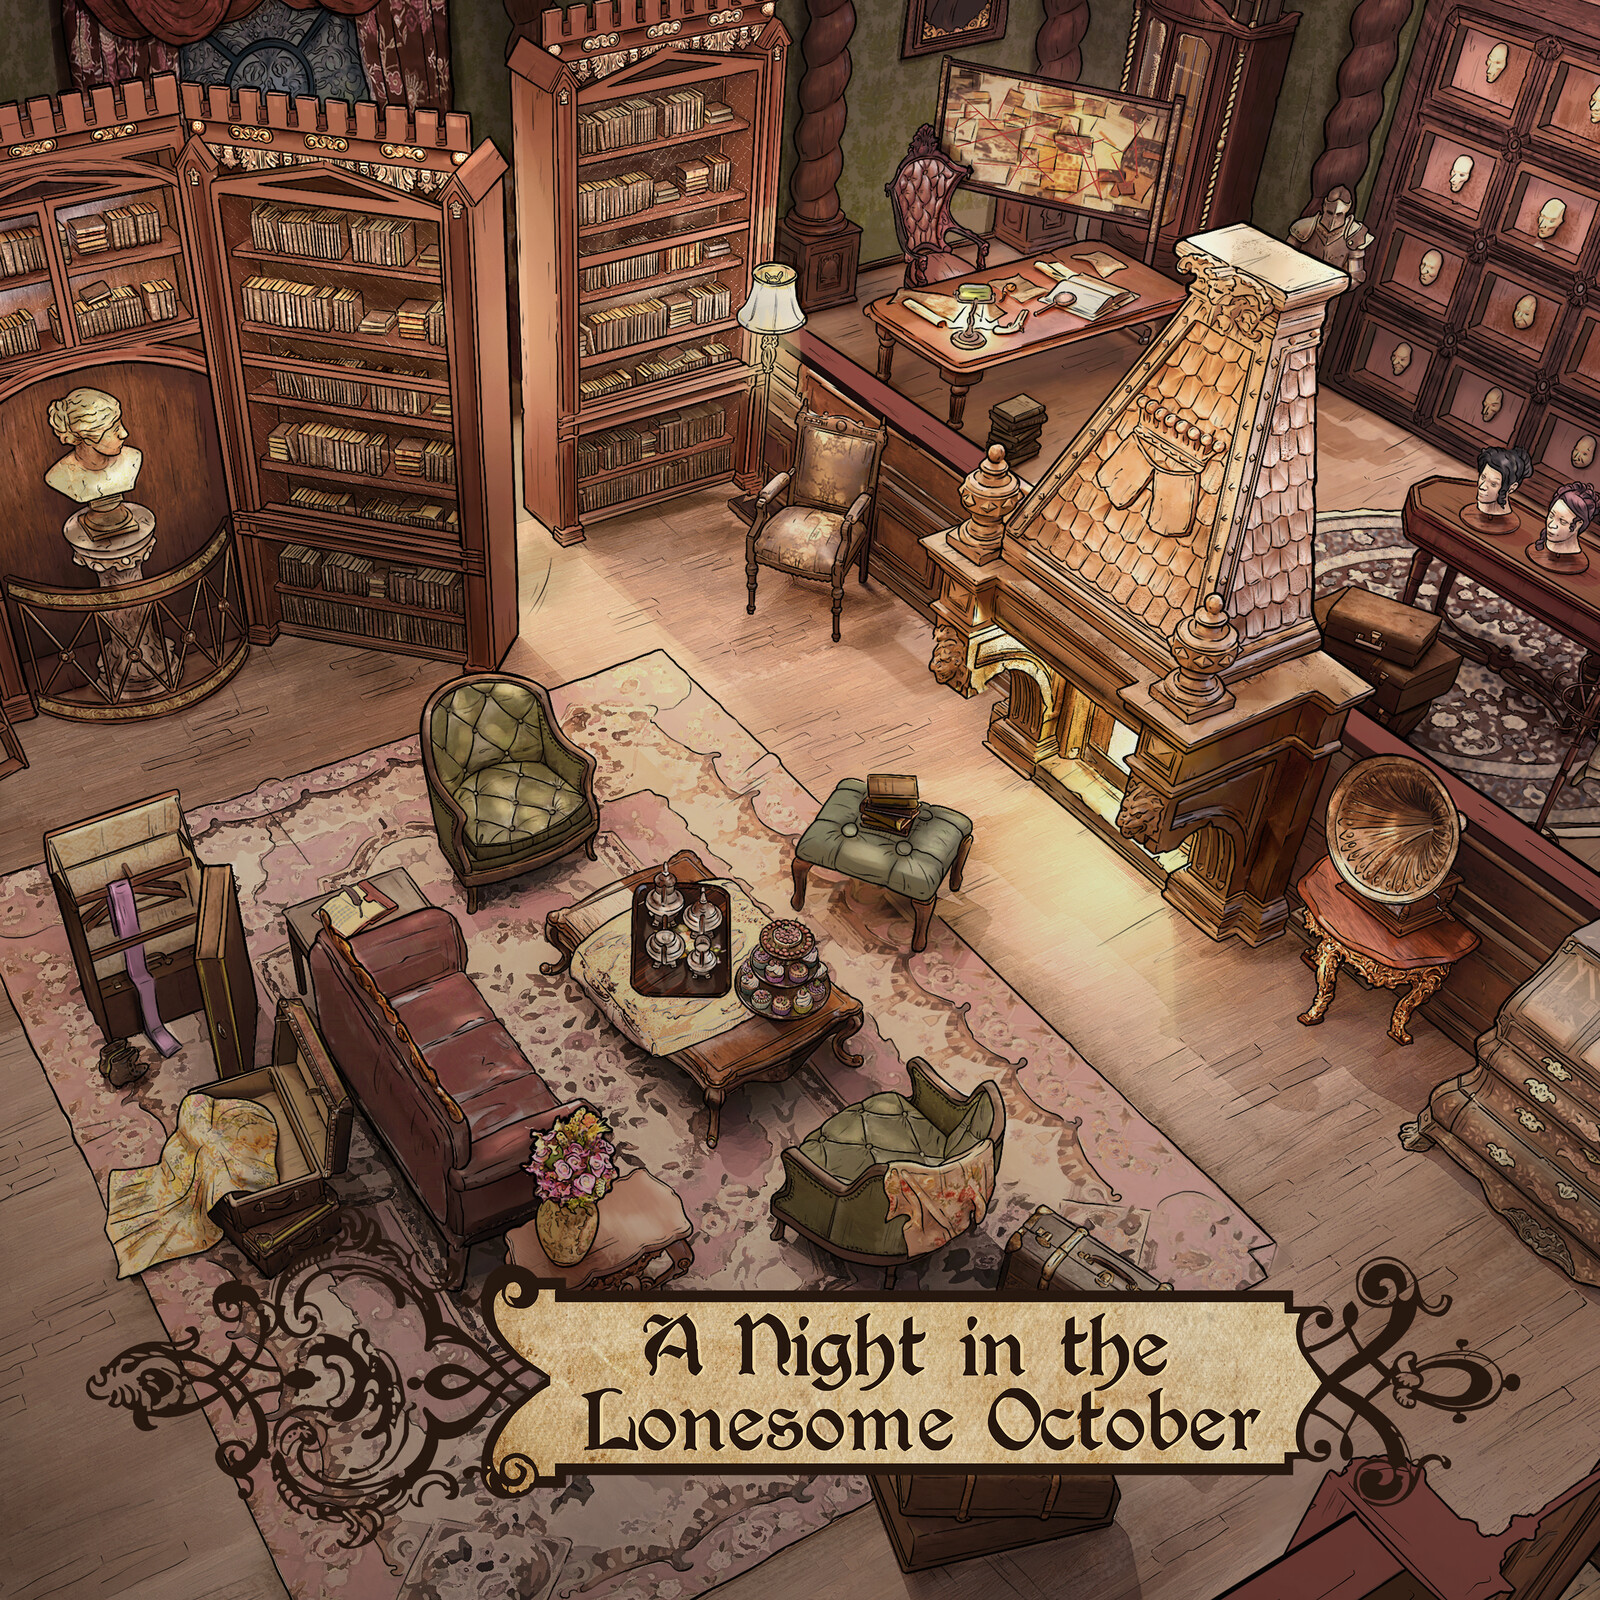  A Night in the Lonesome October - Detective’s Study with Secret Room